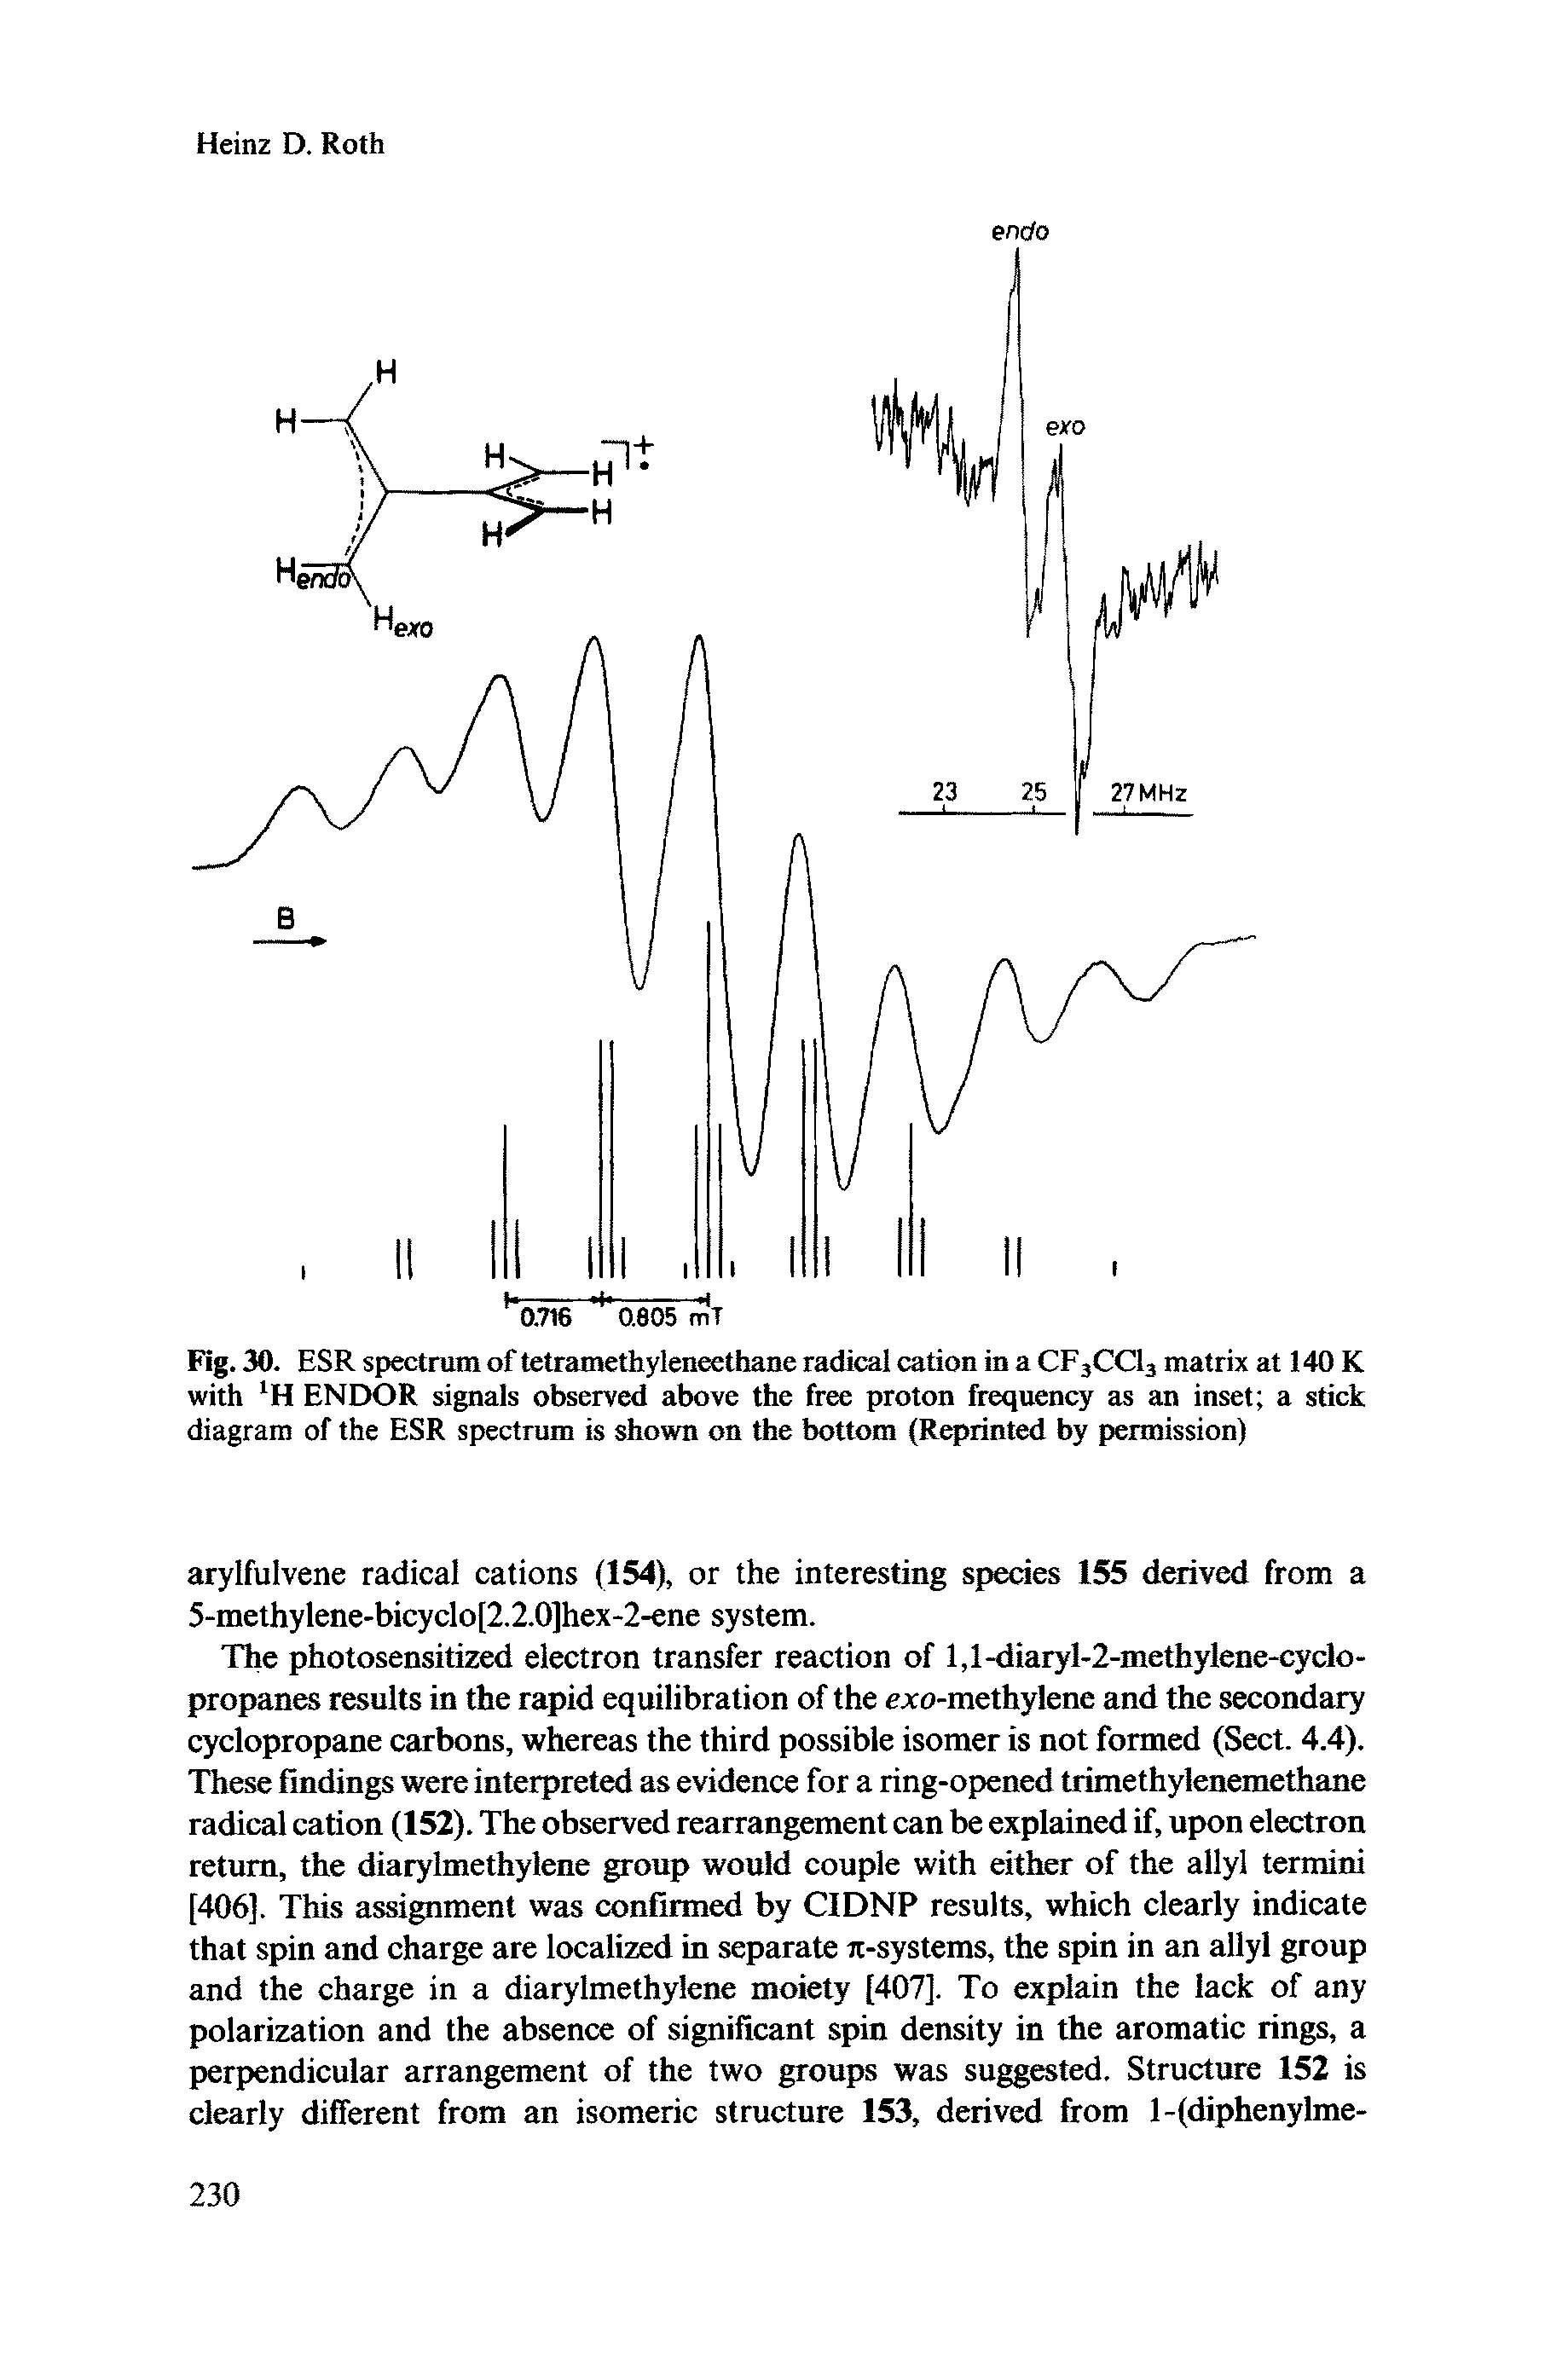 Fig. 30. ESR spectrum of tetramethyleneethane radical cation in a CF3CC13 matrix at 140 K with H ENDOR signals observed above the free proton frequency as an inset a stick diagram of the ESR spectrum is shown on the bottom (Reprinted by permission)...